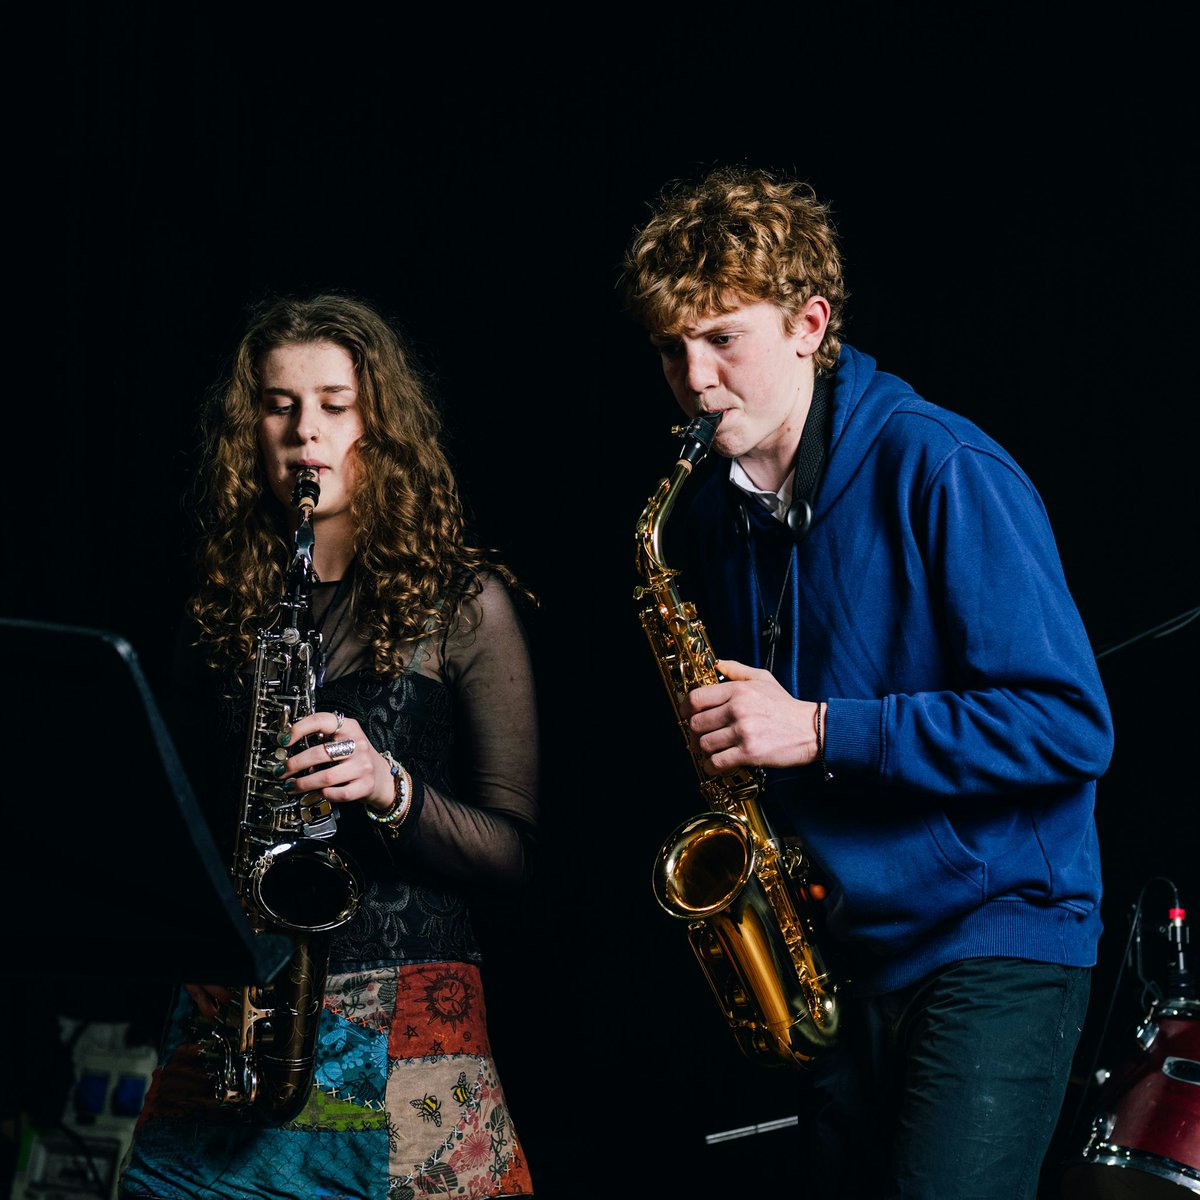 Bravo to our Music Academy students for their spellbinding showcase at @exeter_phoenix! #ExeCollProud